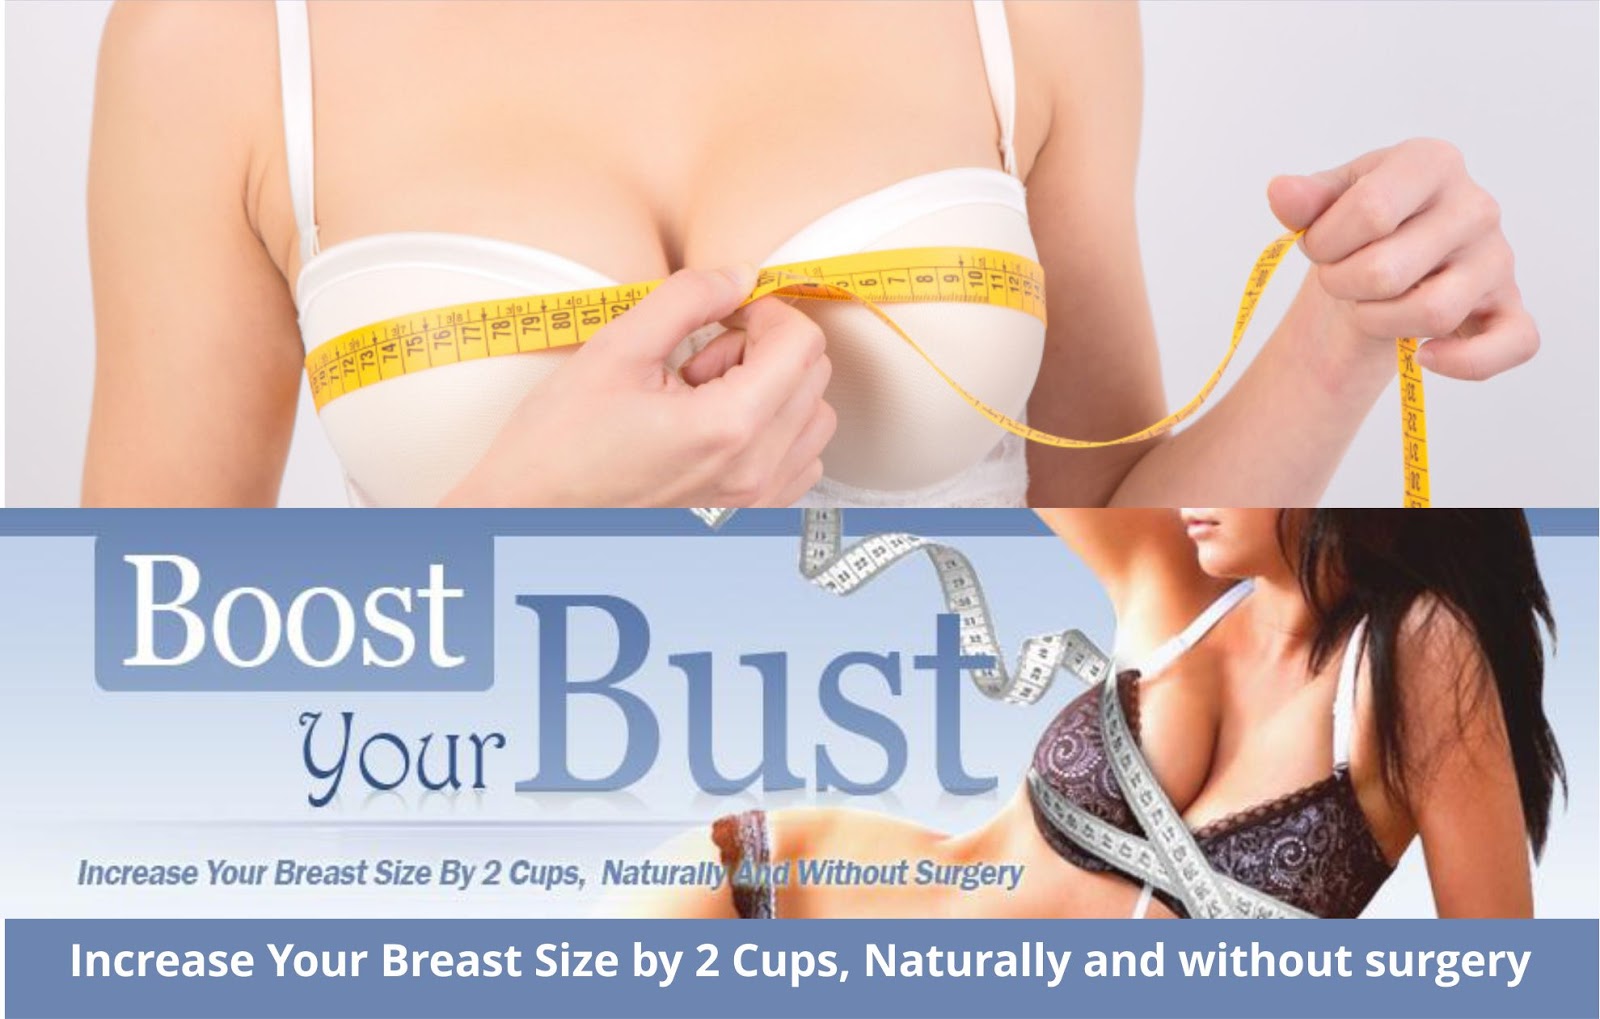 How to get your breasts bigger naturally